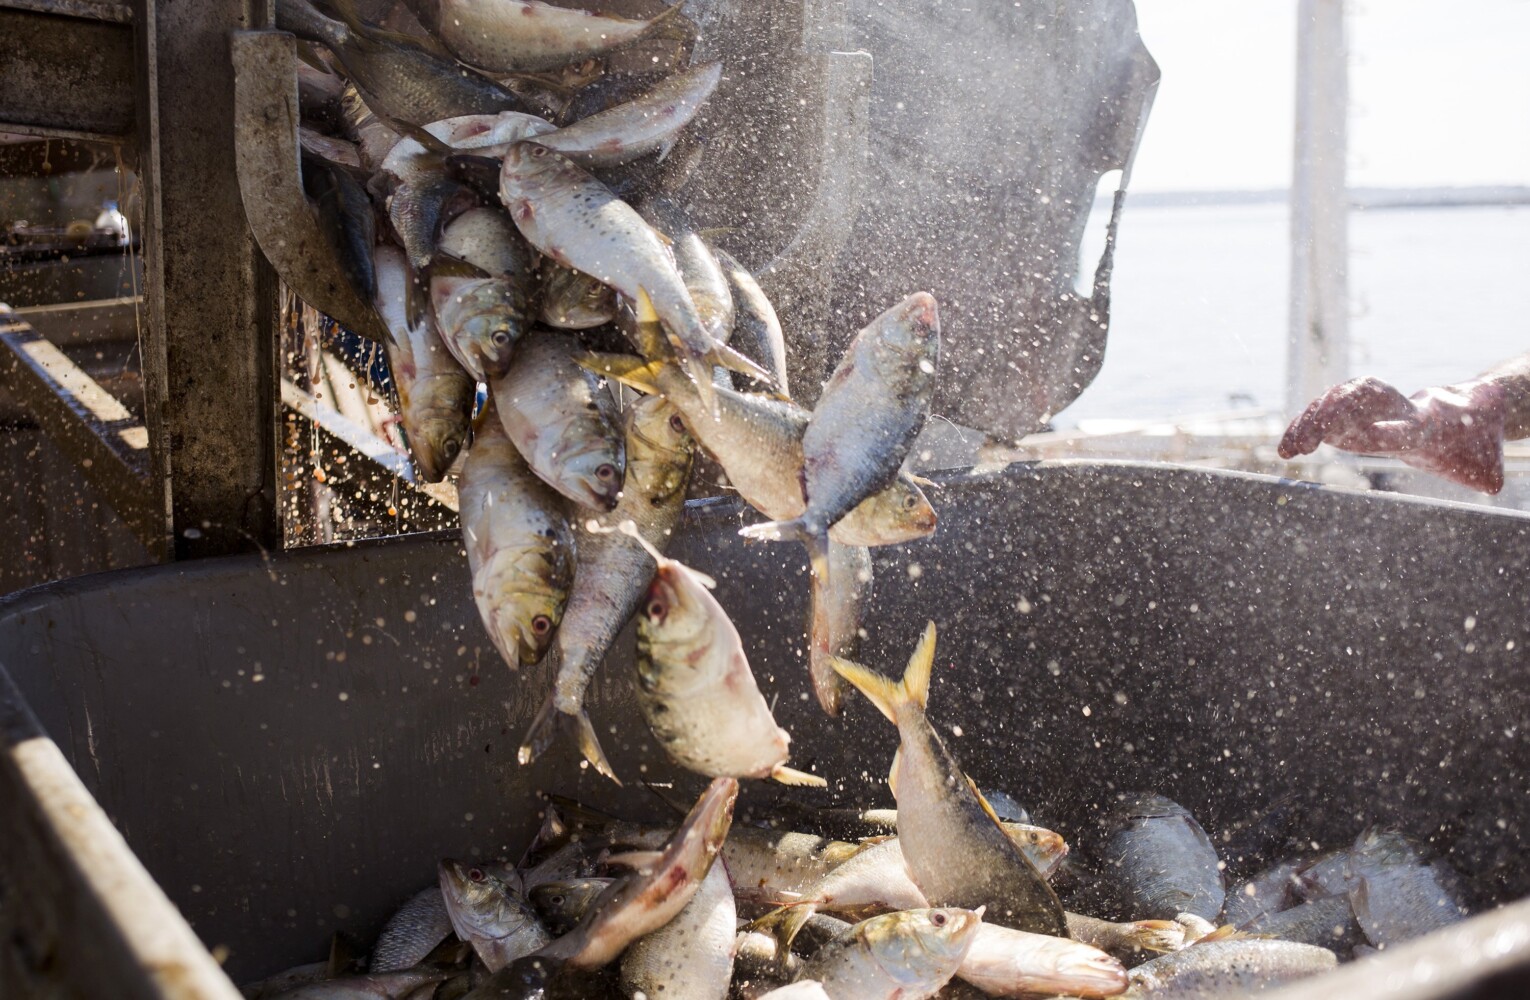 Maine fishermen are fighting to harvest more pogies, used as lobster bait